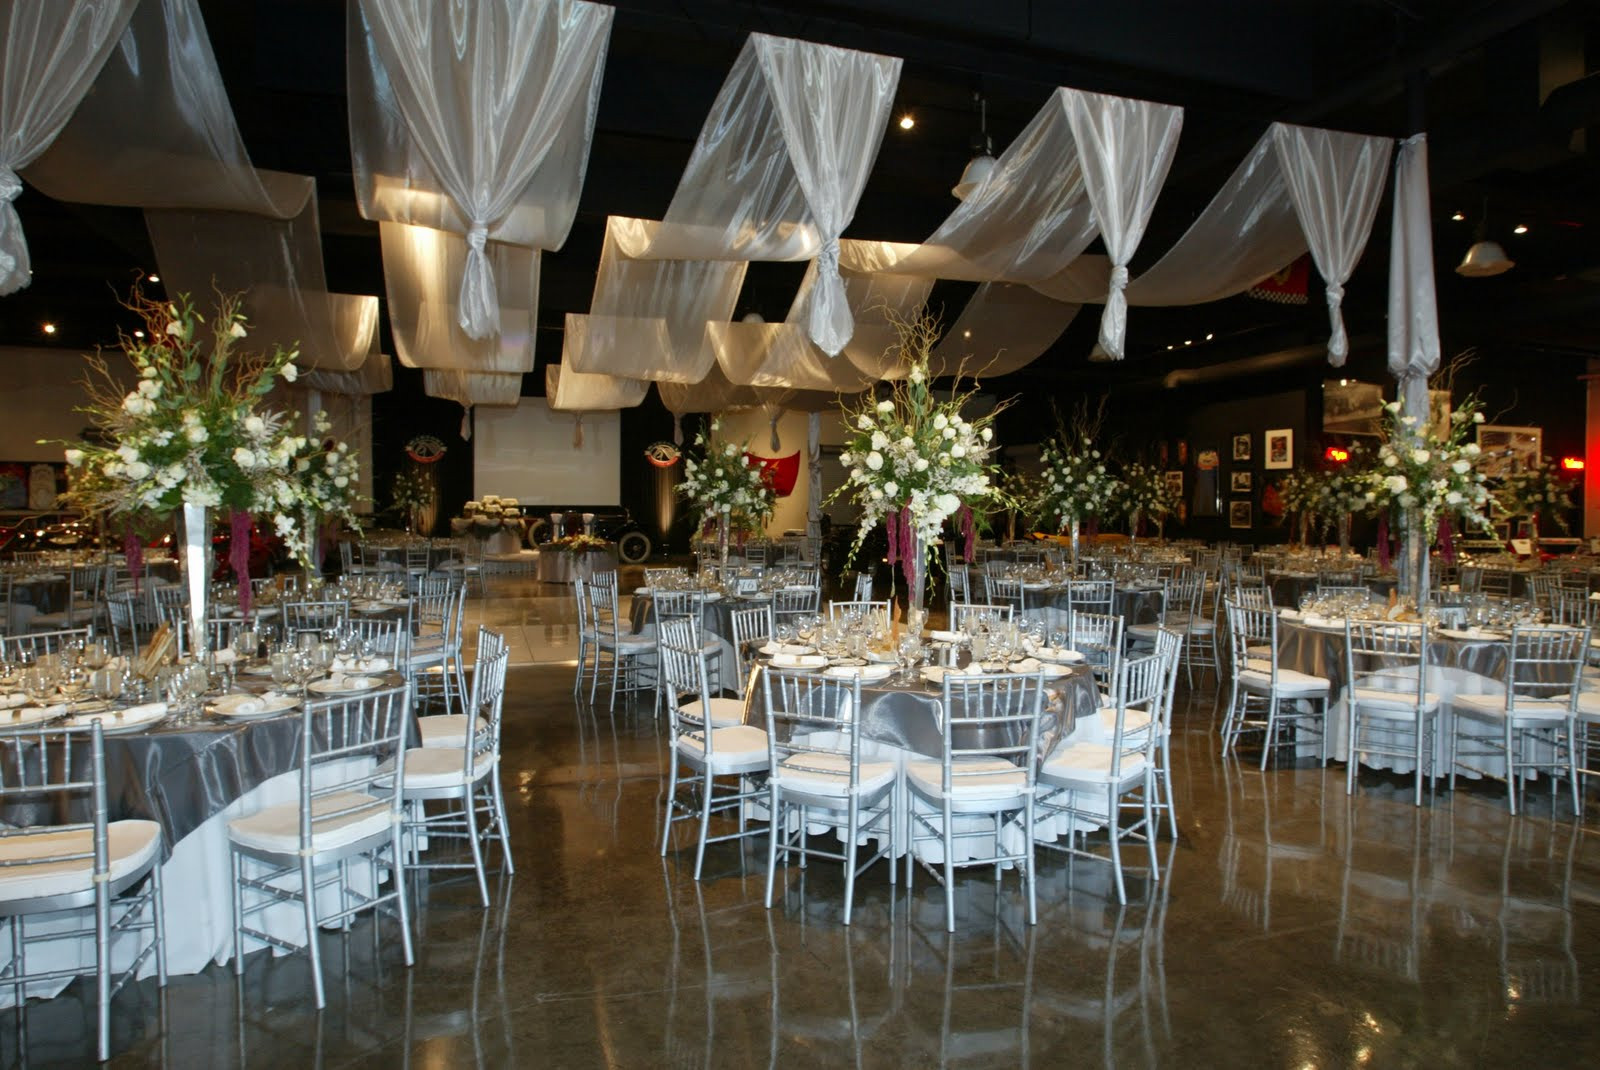 How To Decorate For A Wedding Reception
 Summer Wedding Idea Wedding Receptions